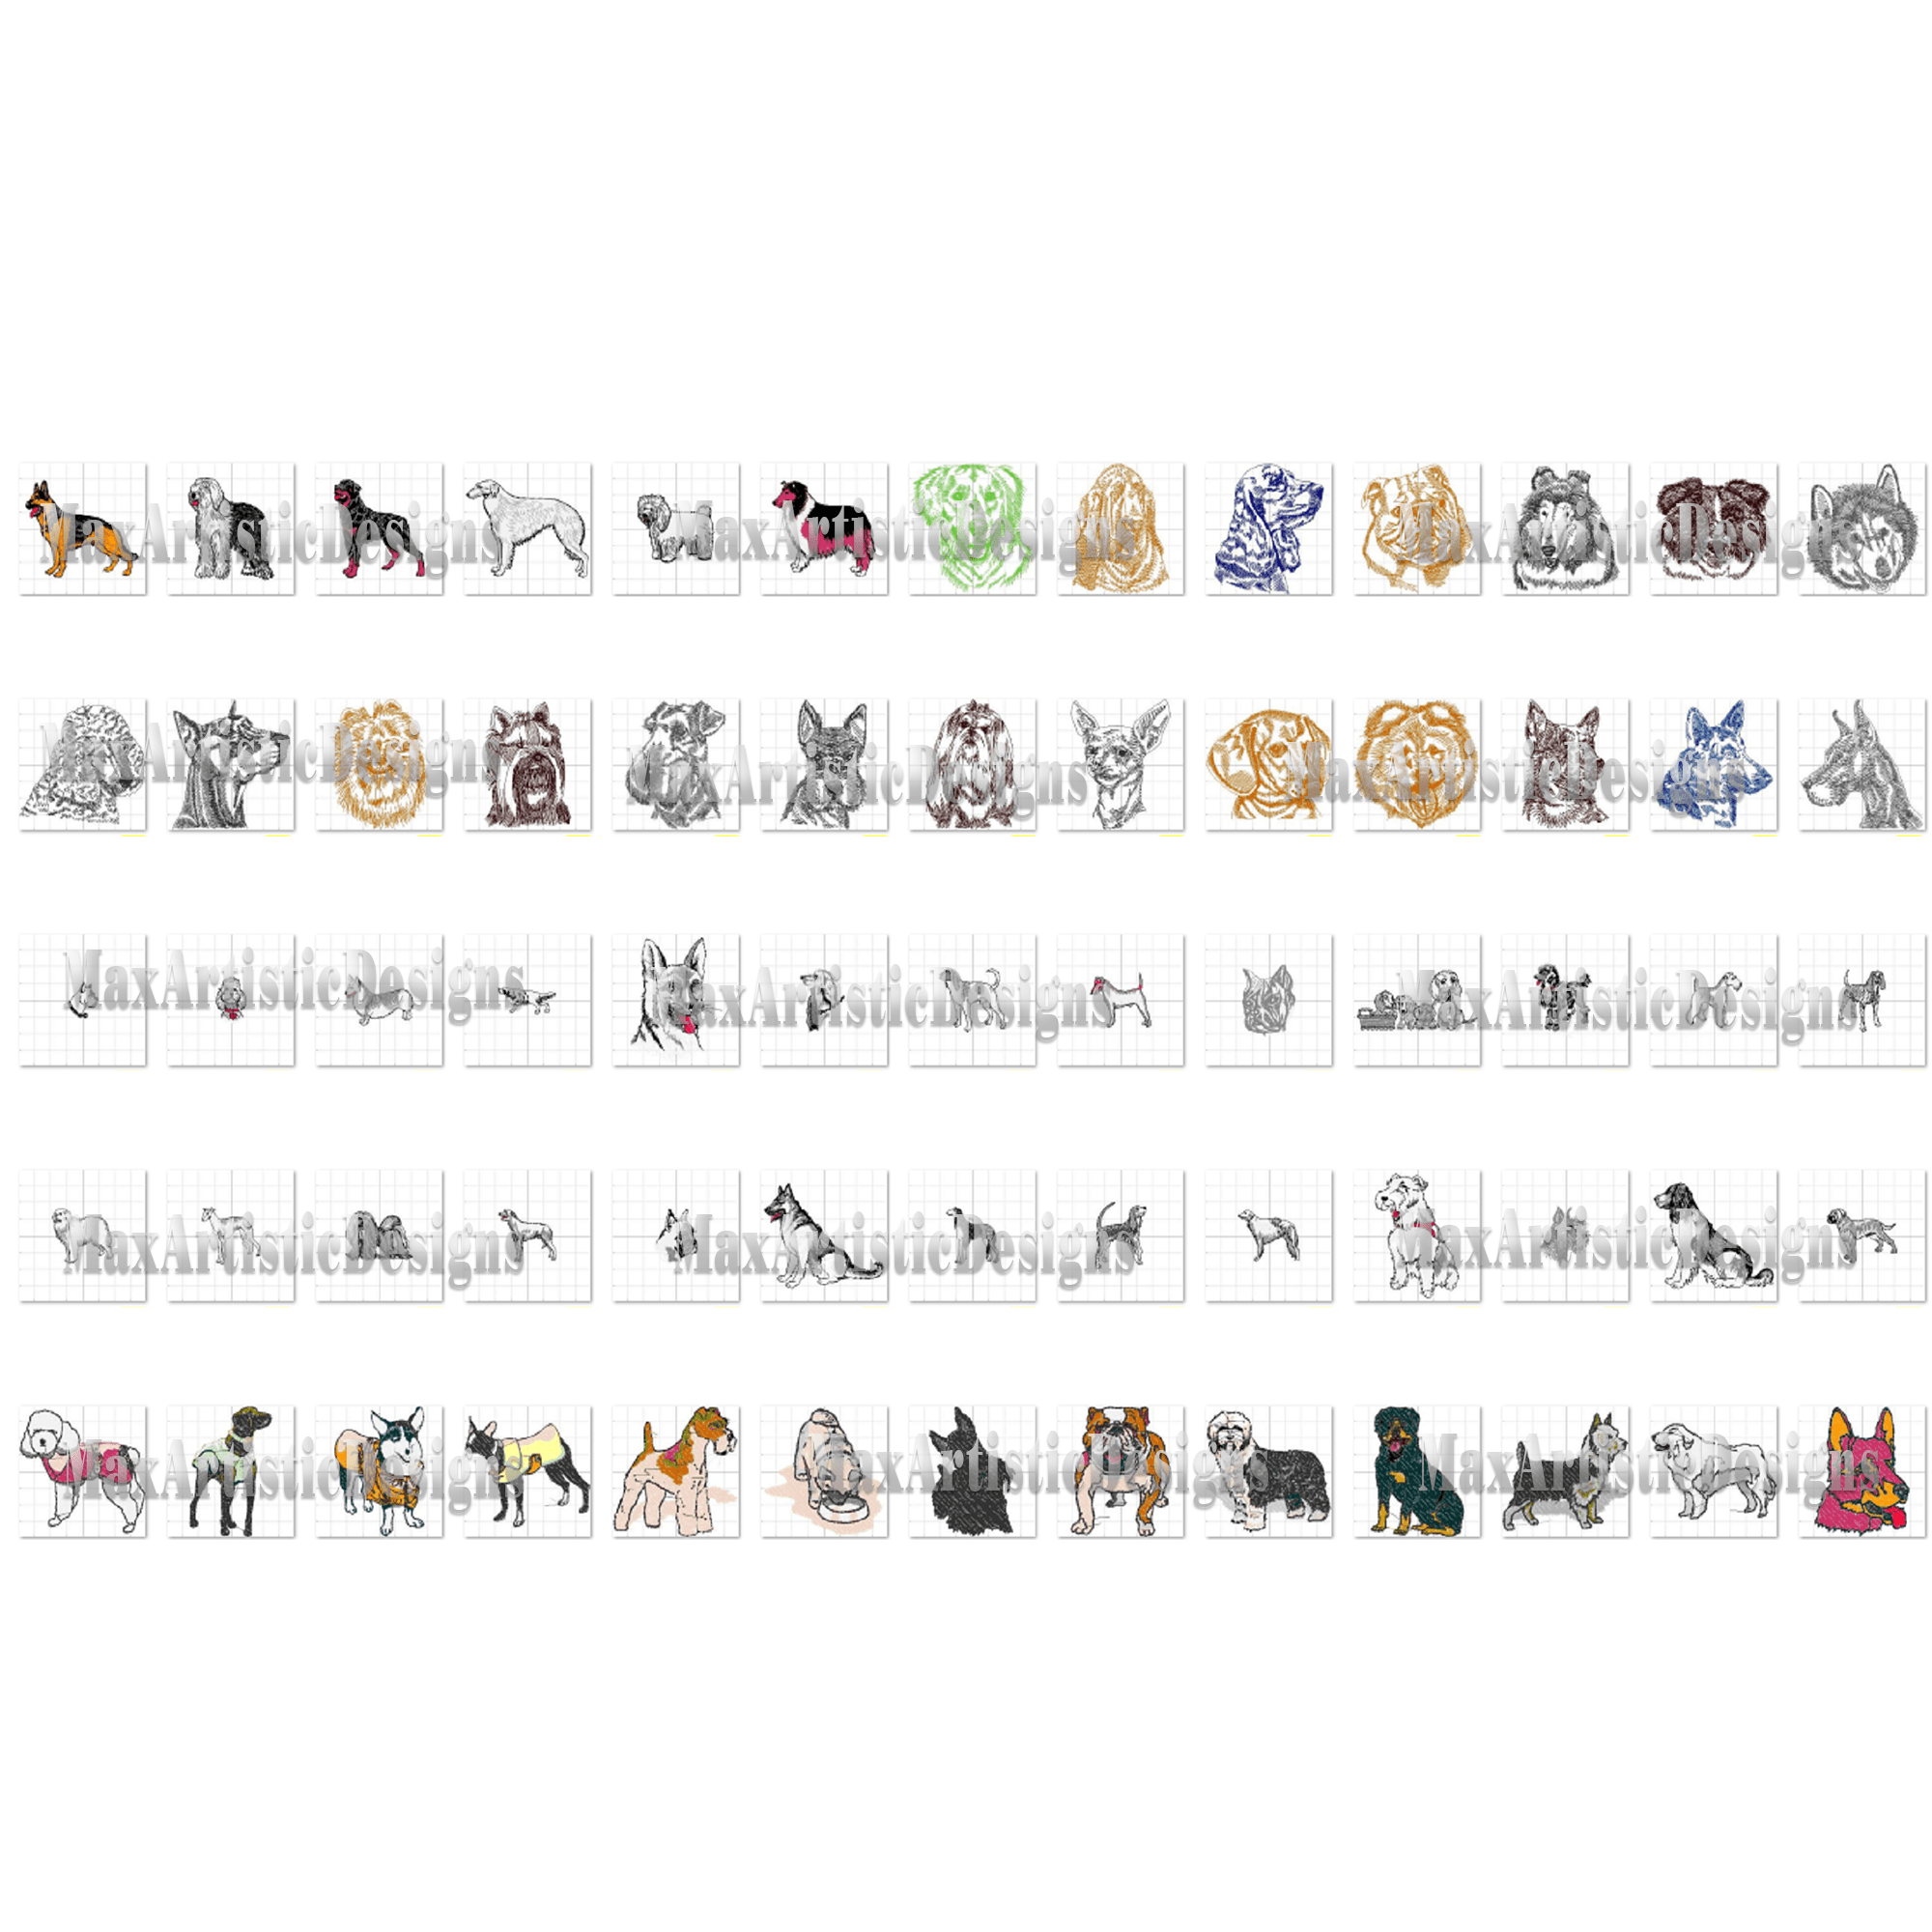 550+ dogs embroidery designs for machine embroidery in pes jpg format download